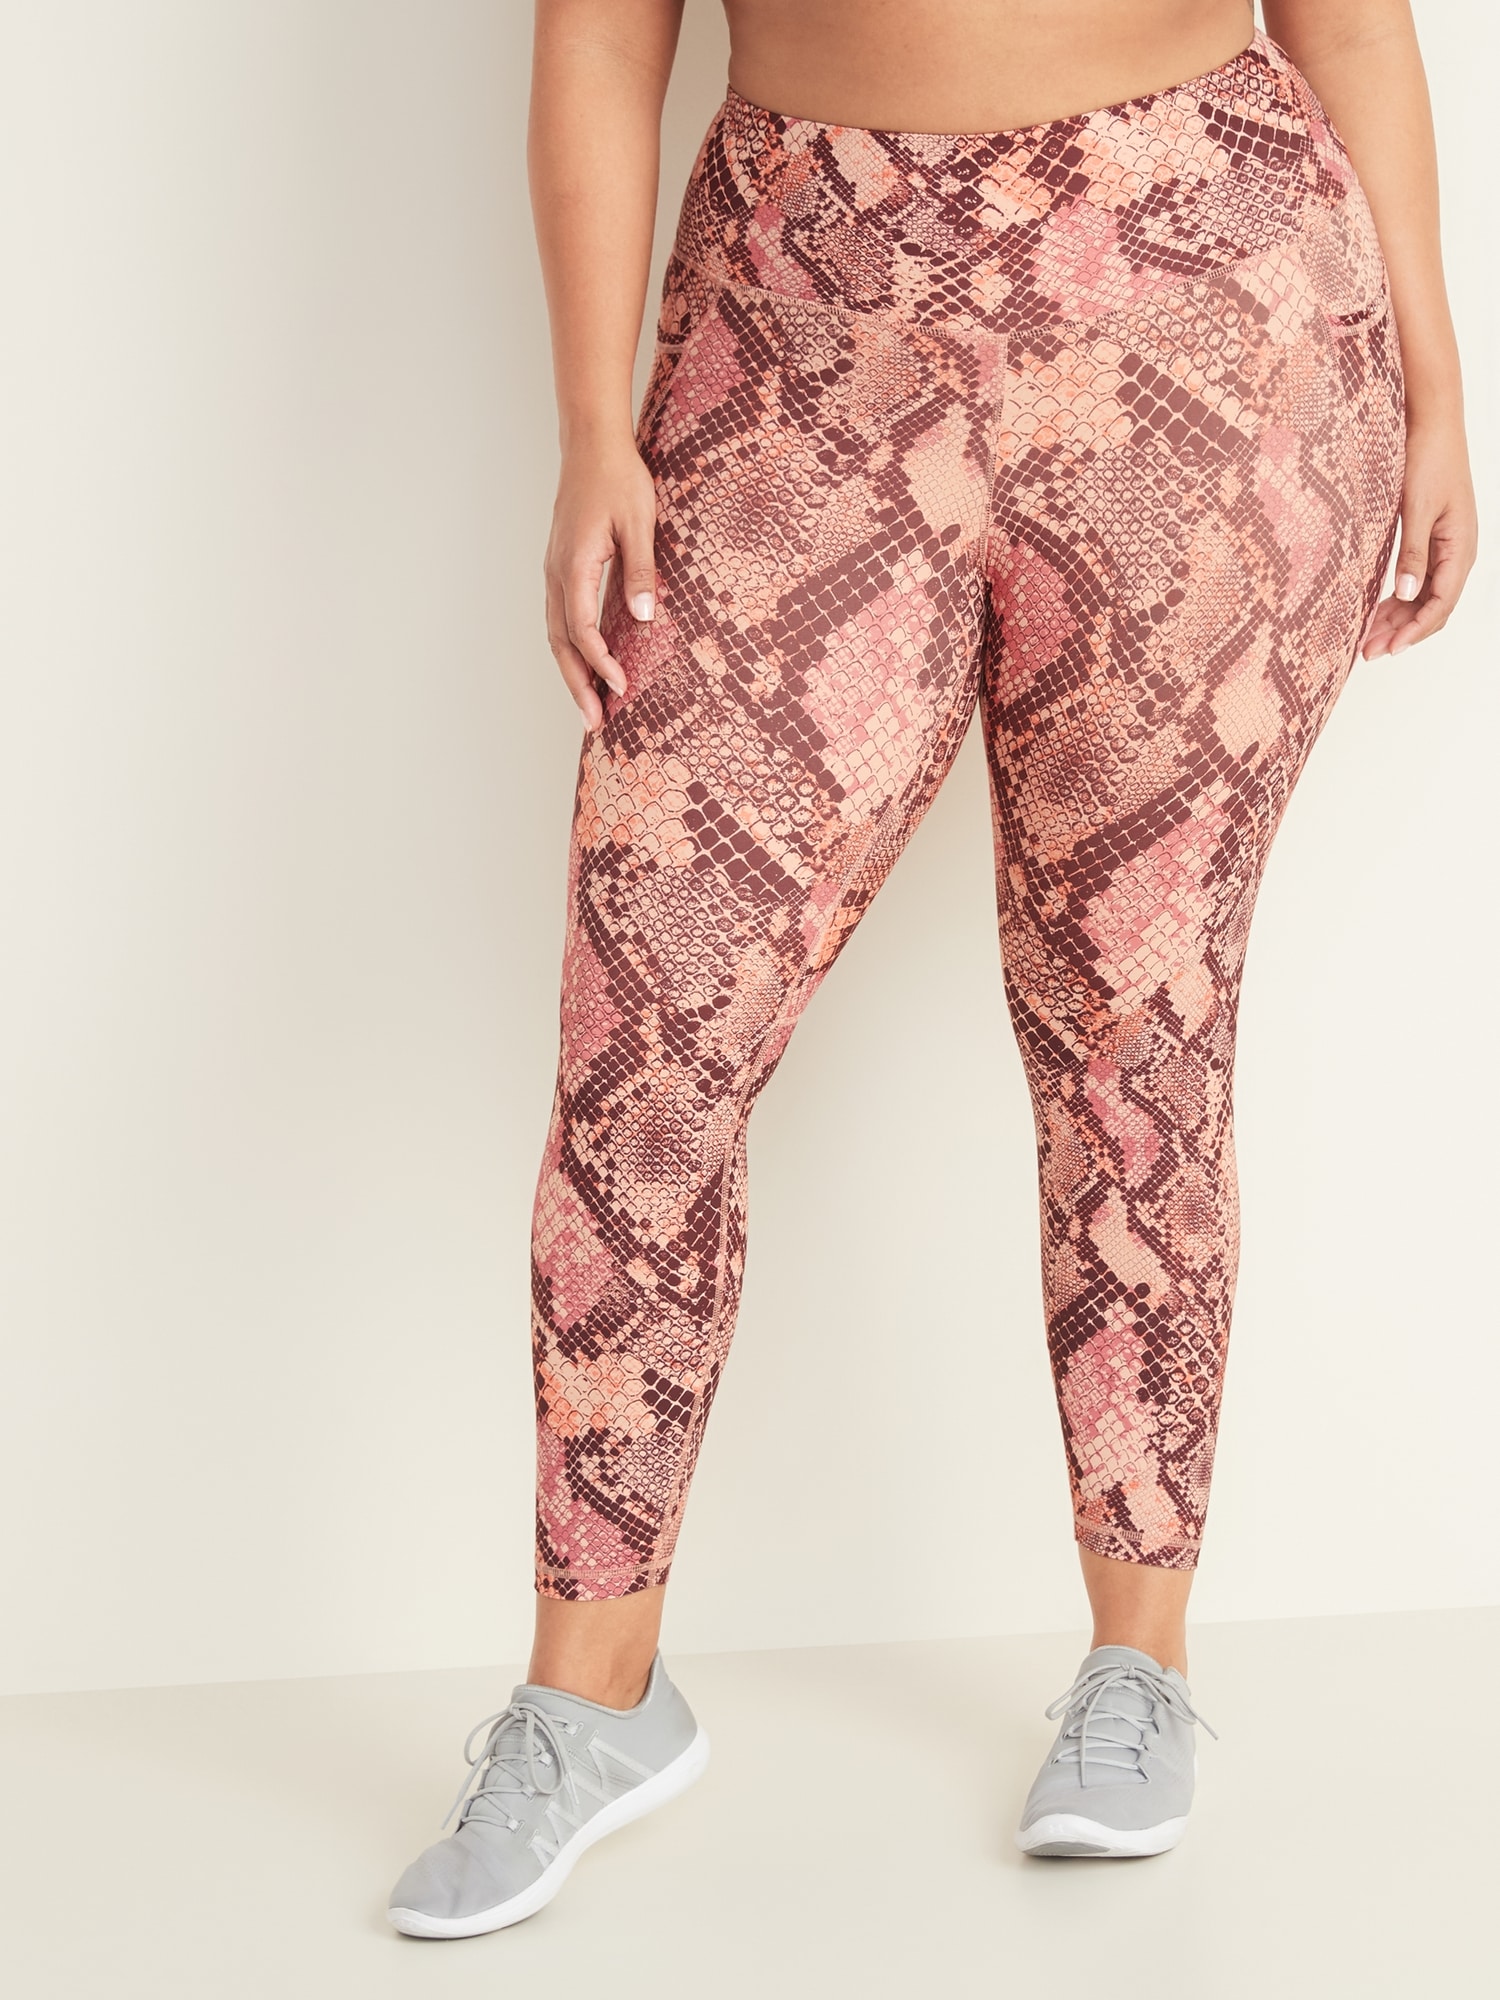 PLUS-Old Navy Women's High-Waisted Elevate Compression Leggings